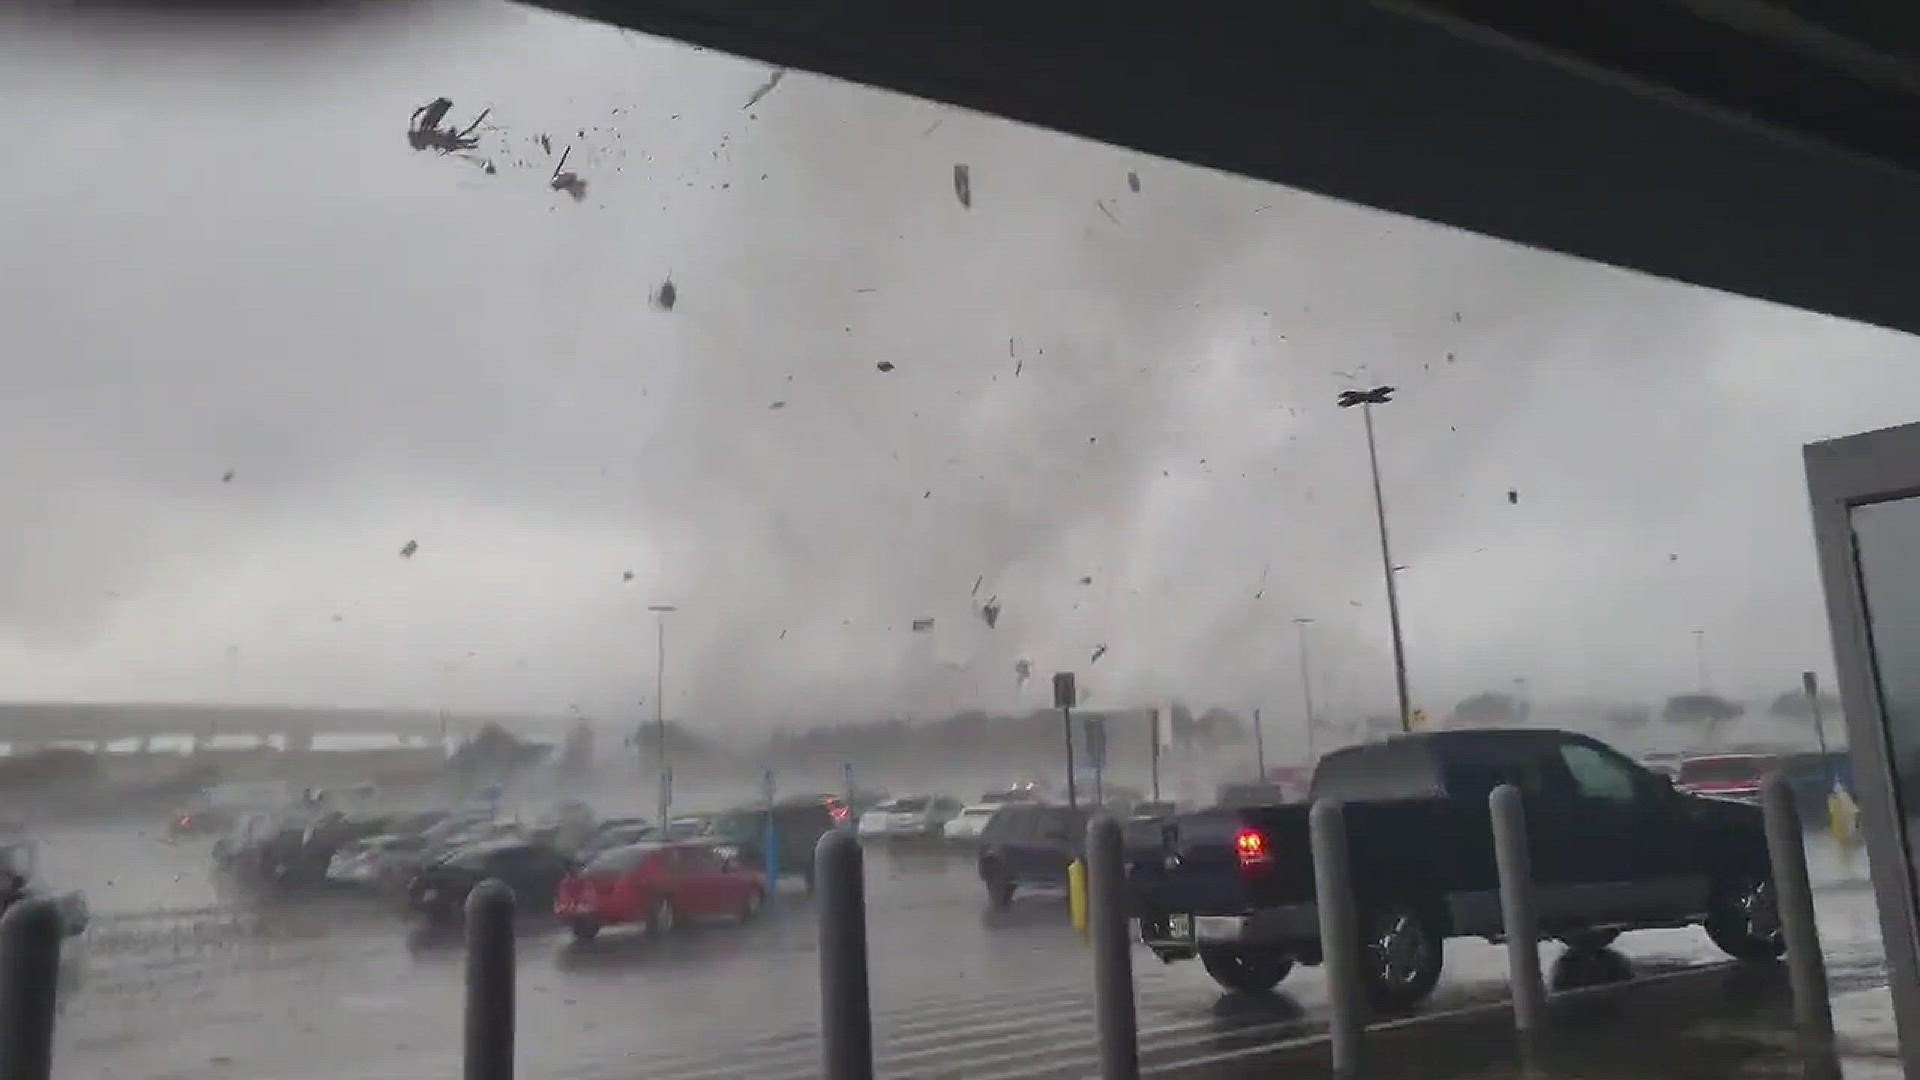 Viewer footage shows chaos outside of a Round Rock Walmart on Monday, March 22, when a tornado touched down nearby. Credit: "Ya Boi James Watson"